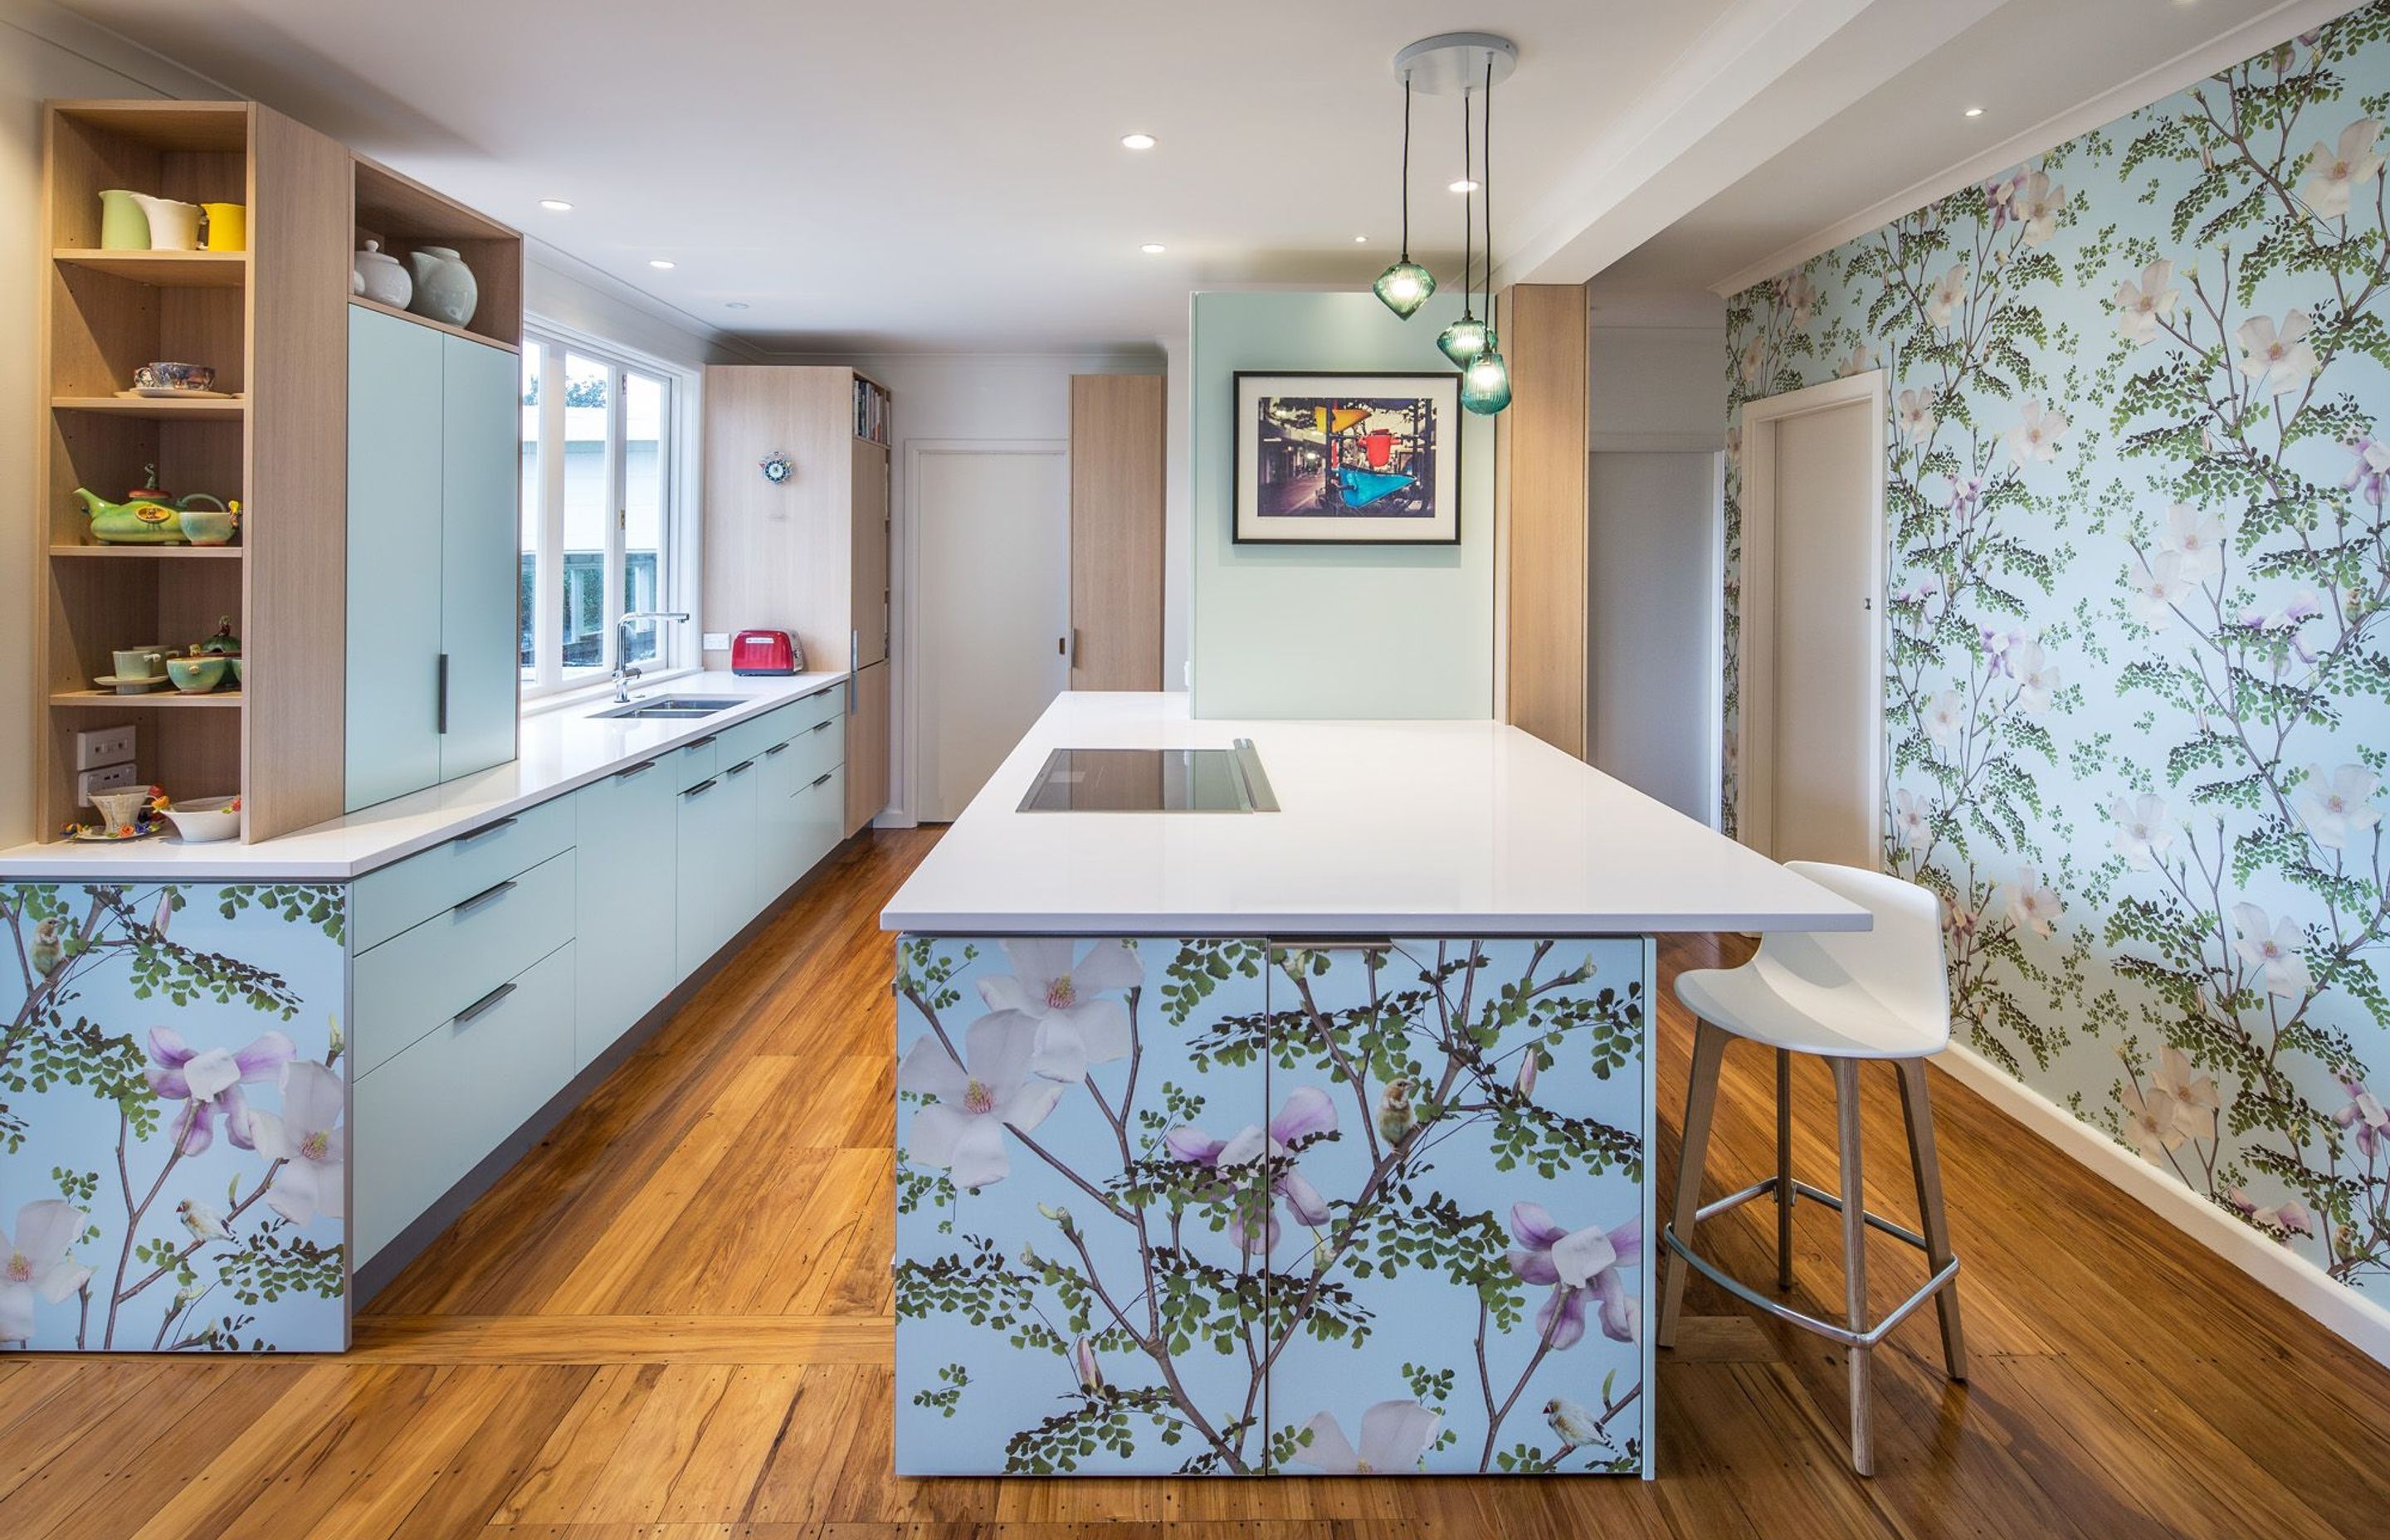 "The Magnolia Kitchen design was built around the client’s love of a magnolia wall mural."